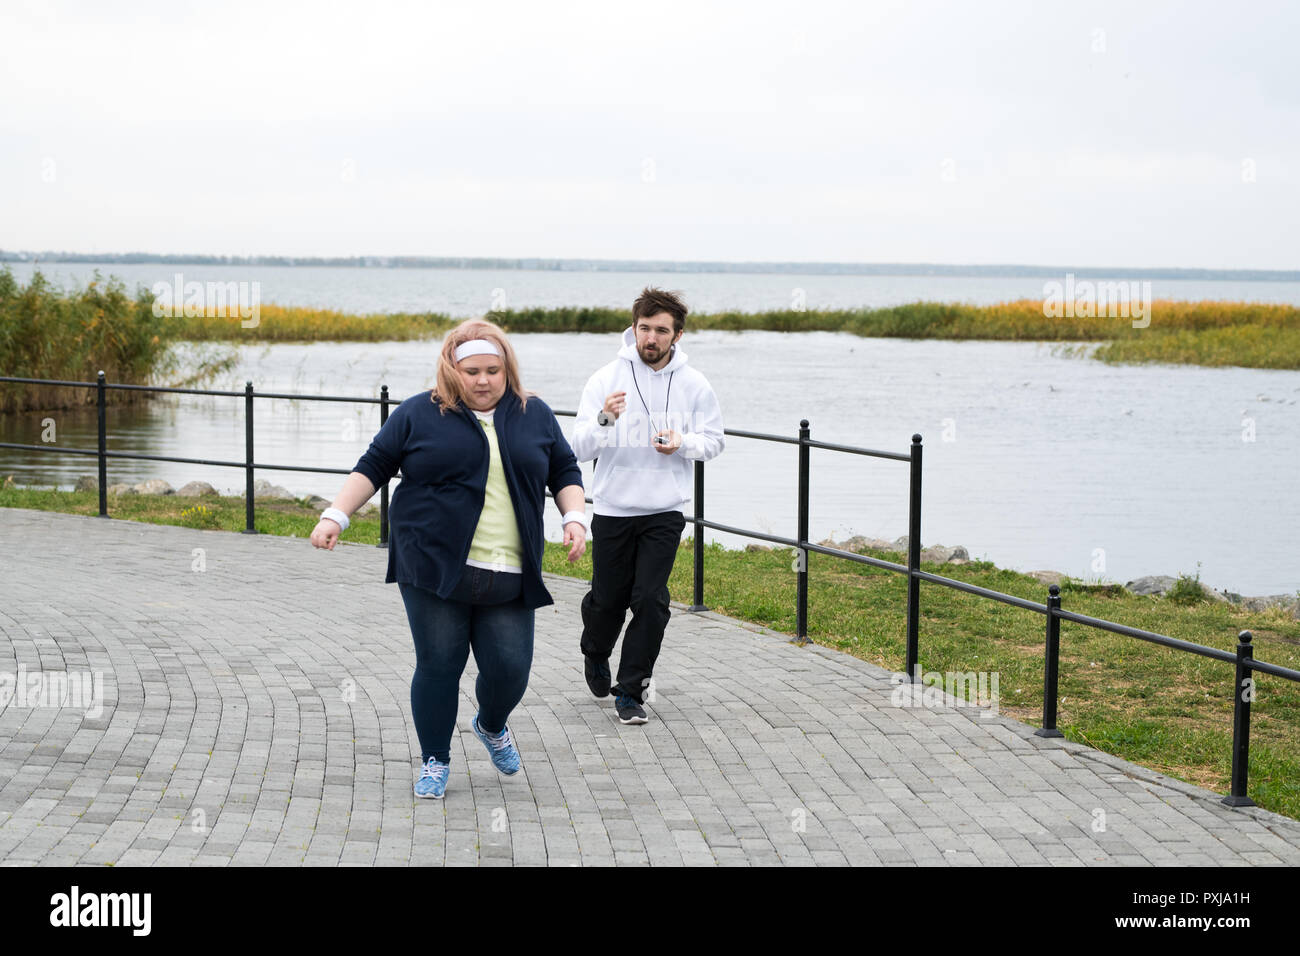 Overweight Woman Running in Park Stock Photo